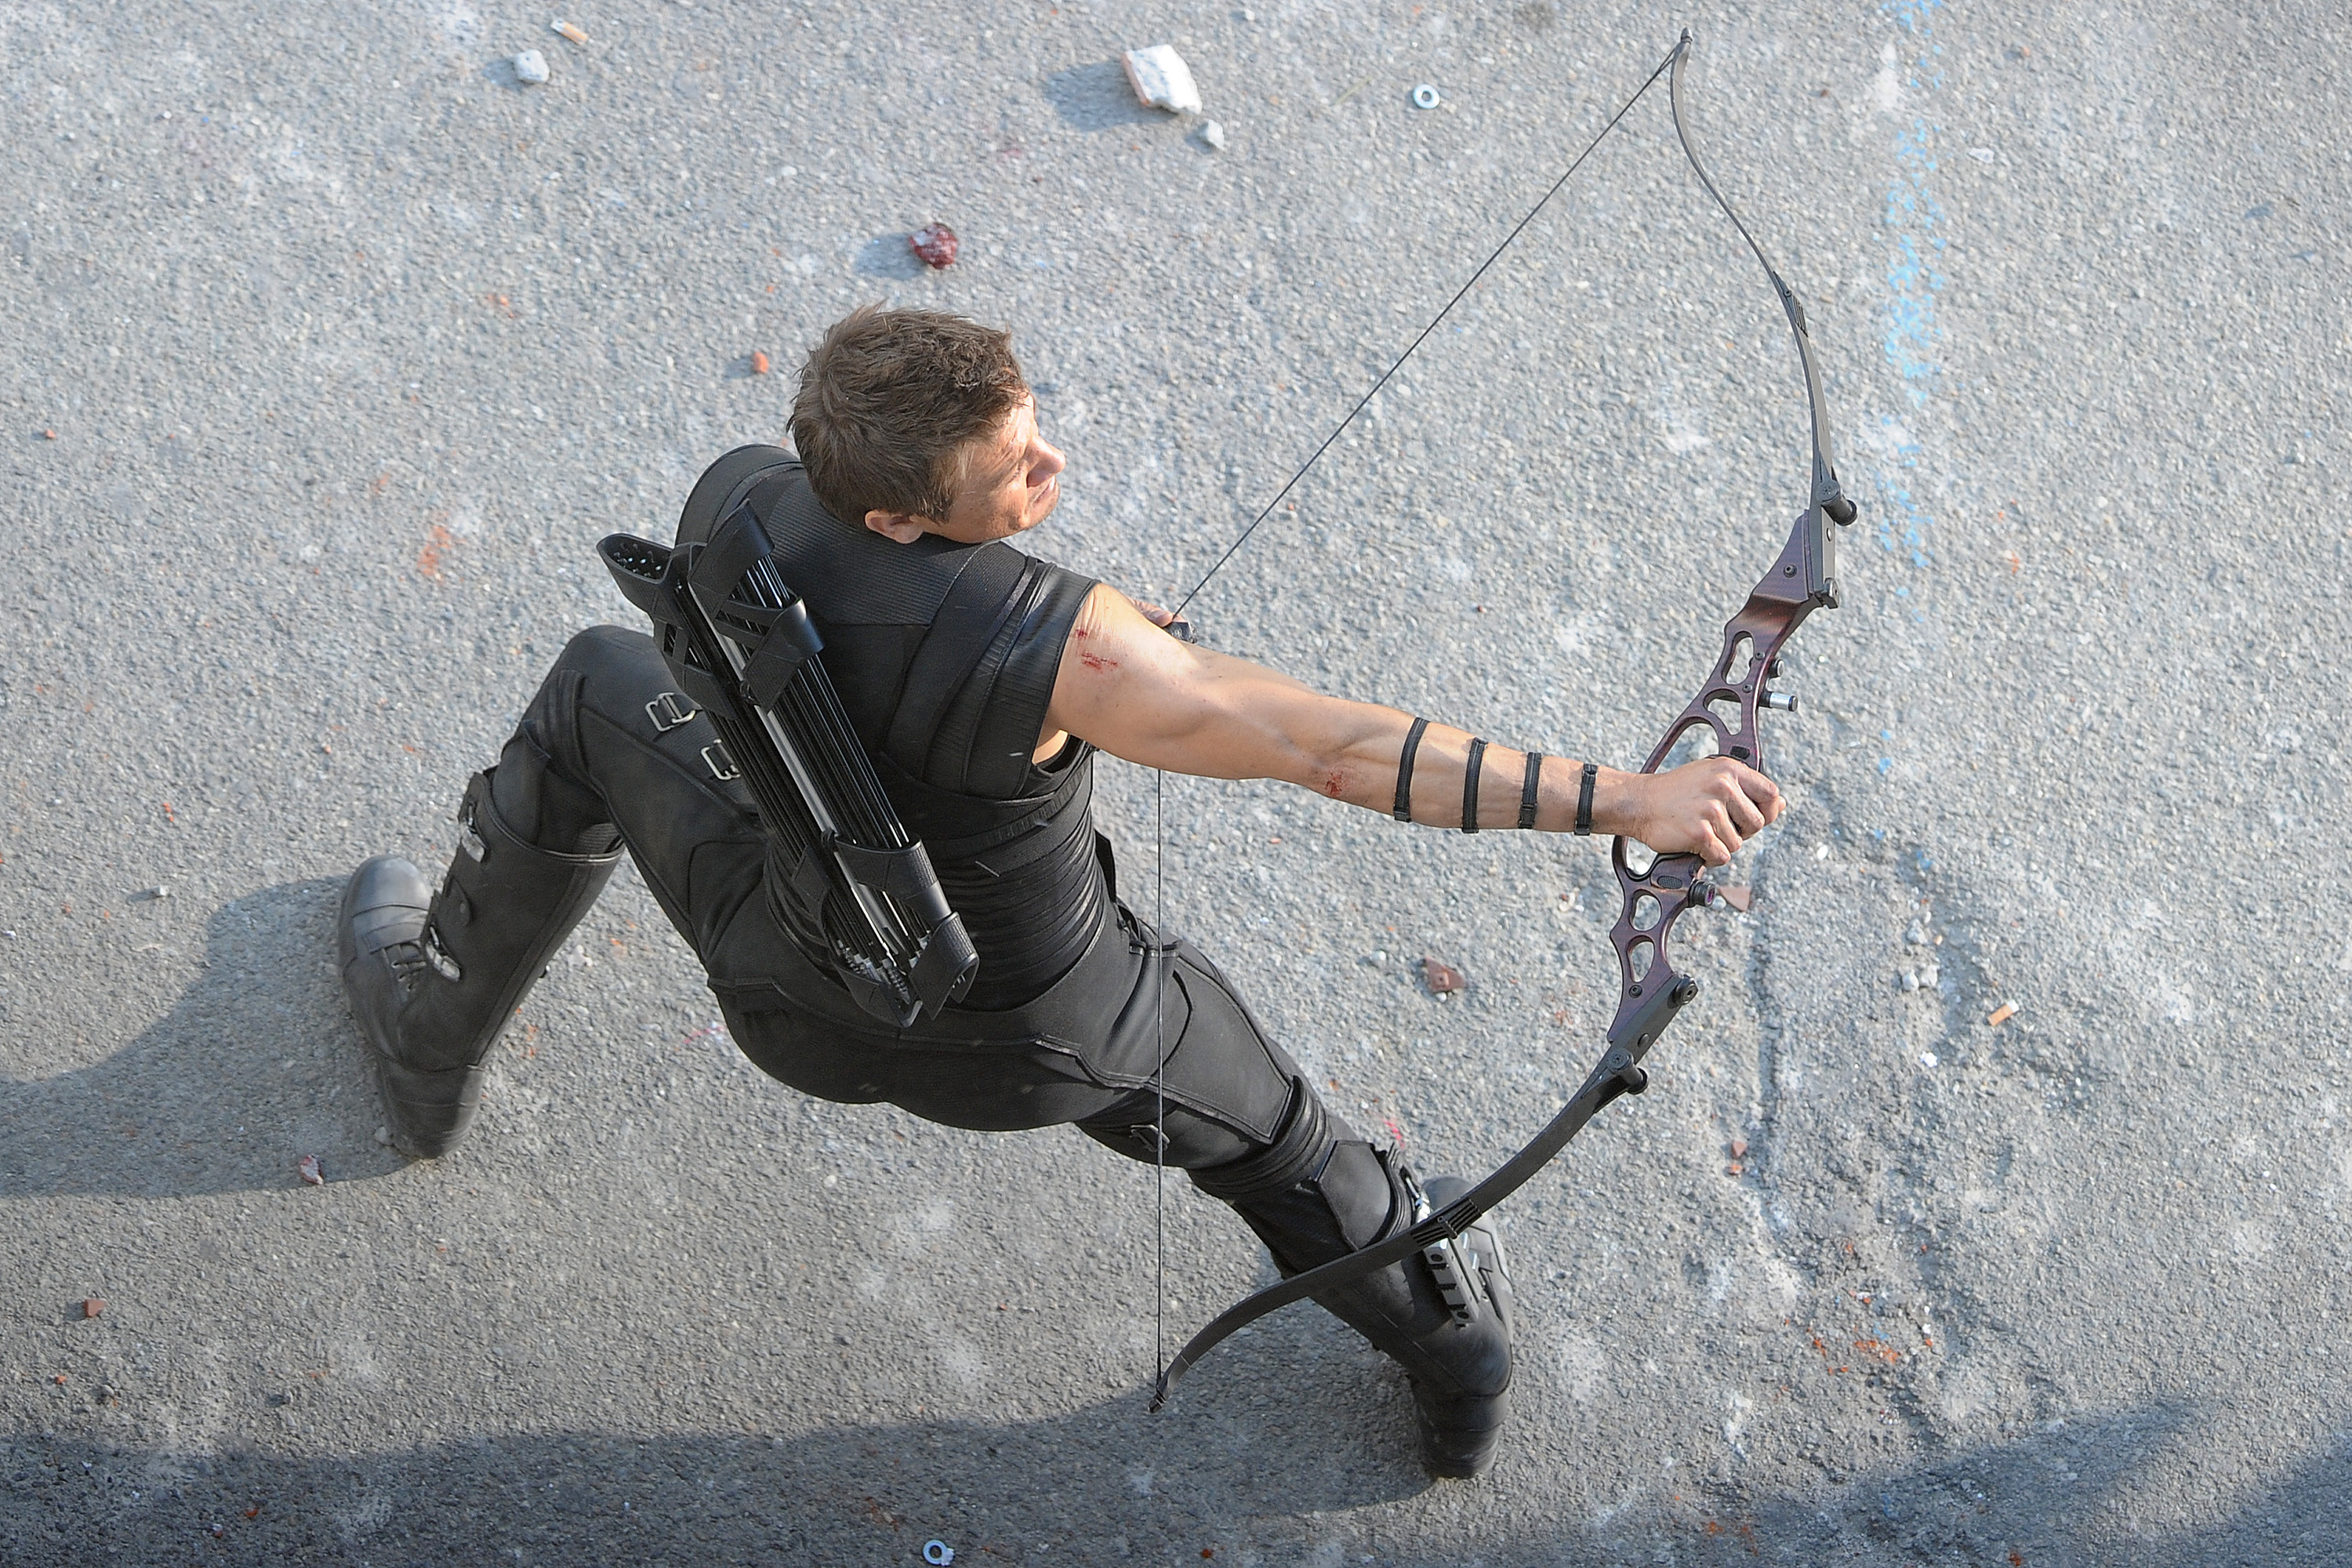 The two will join Marvel's Jeremy Renner, who plays Hawkeye, along with the rest of Marvel's pantheon of superheroes.